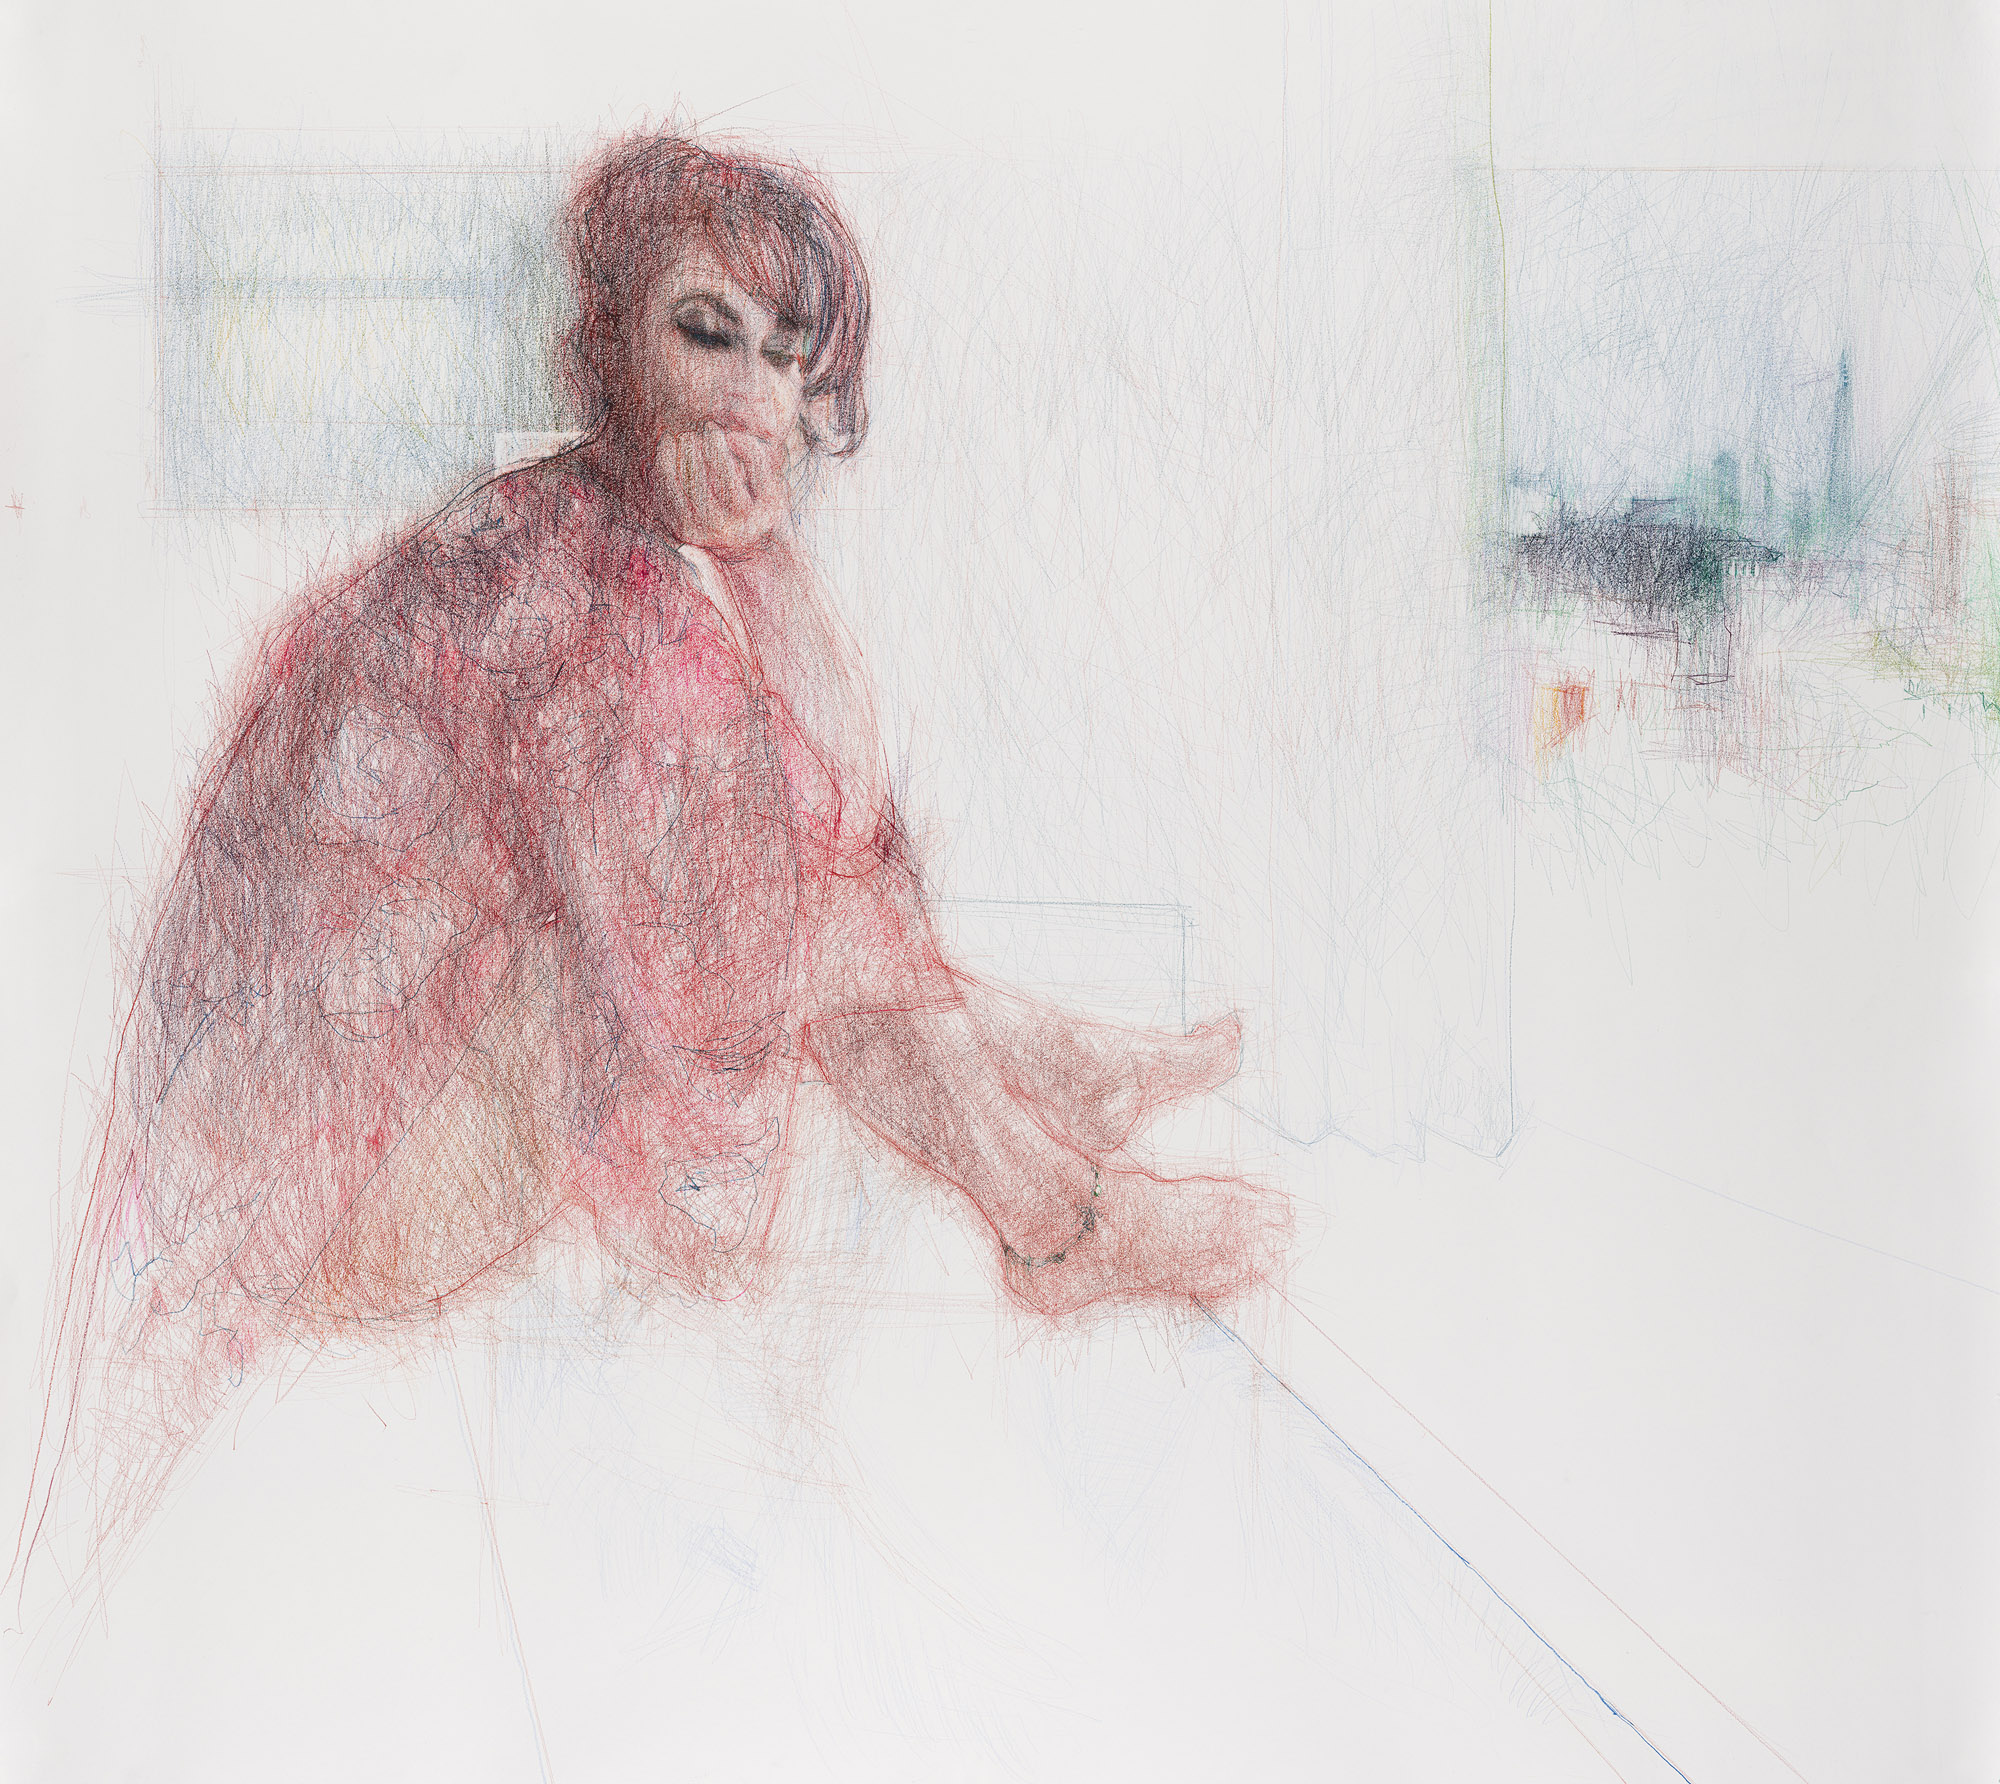 Sunday 11:42 am, 2021 Curtis Holder Coloured pencil on paper,128 x 140 cm